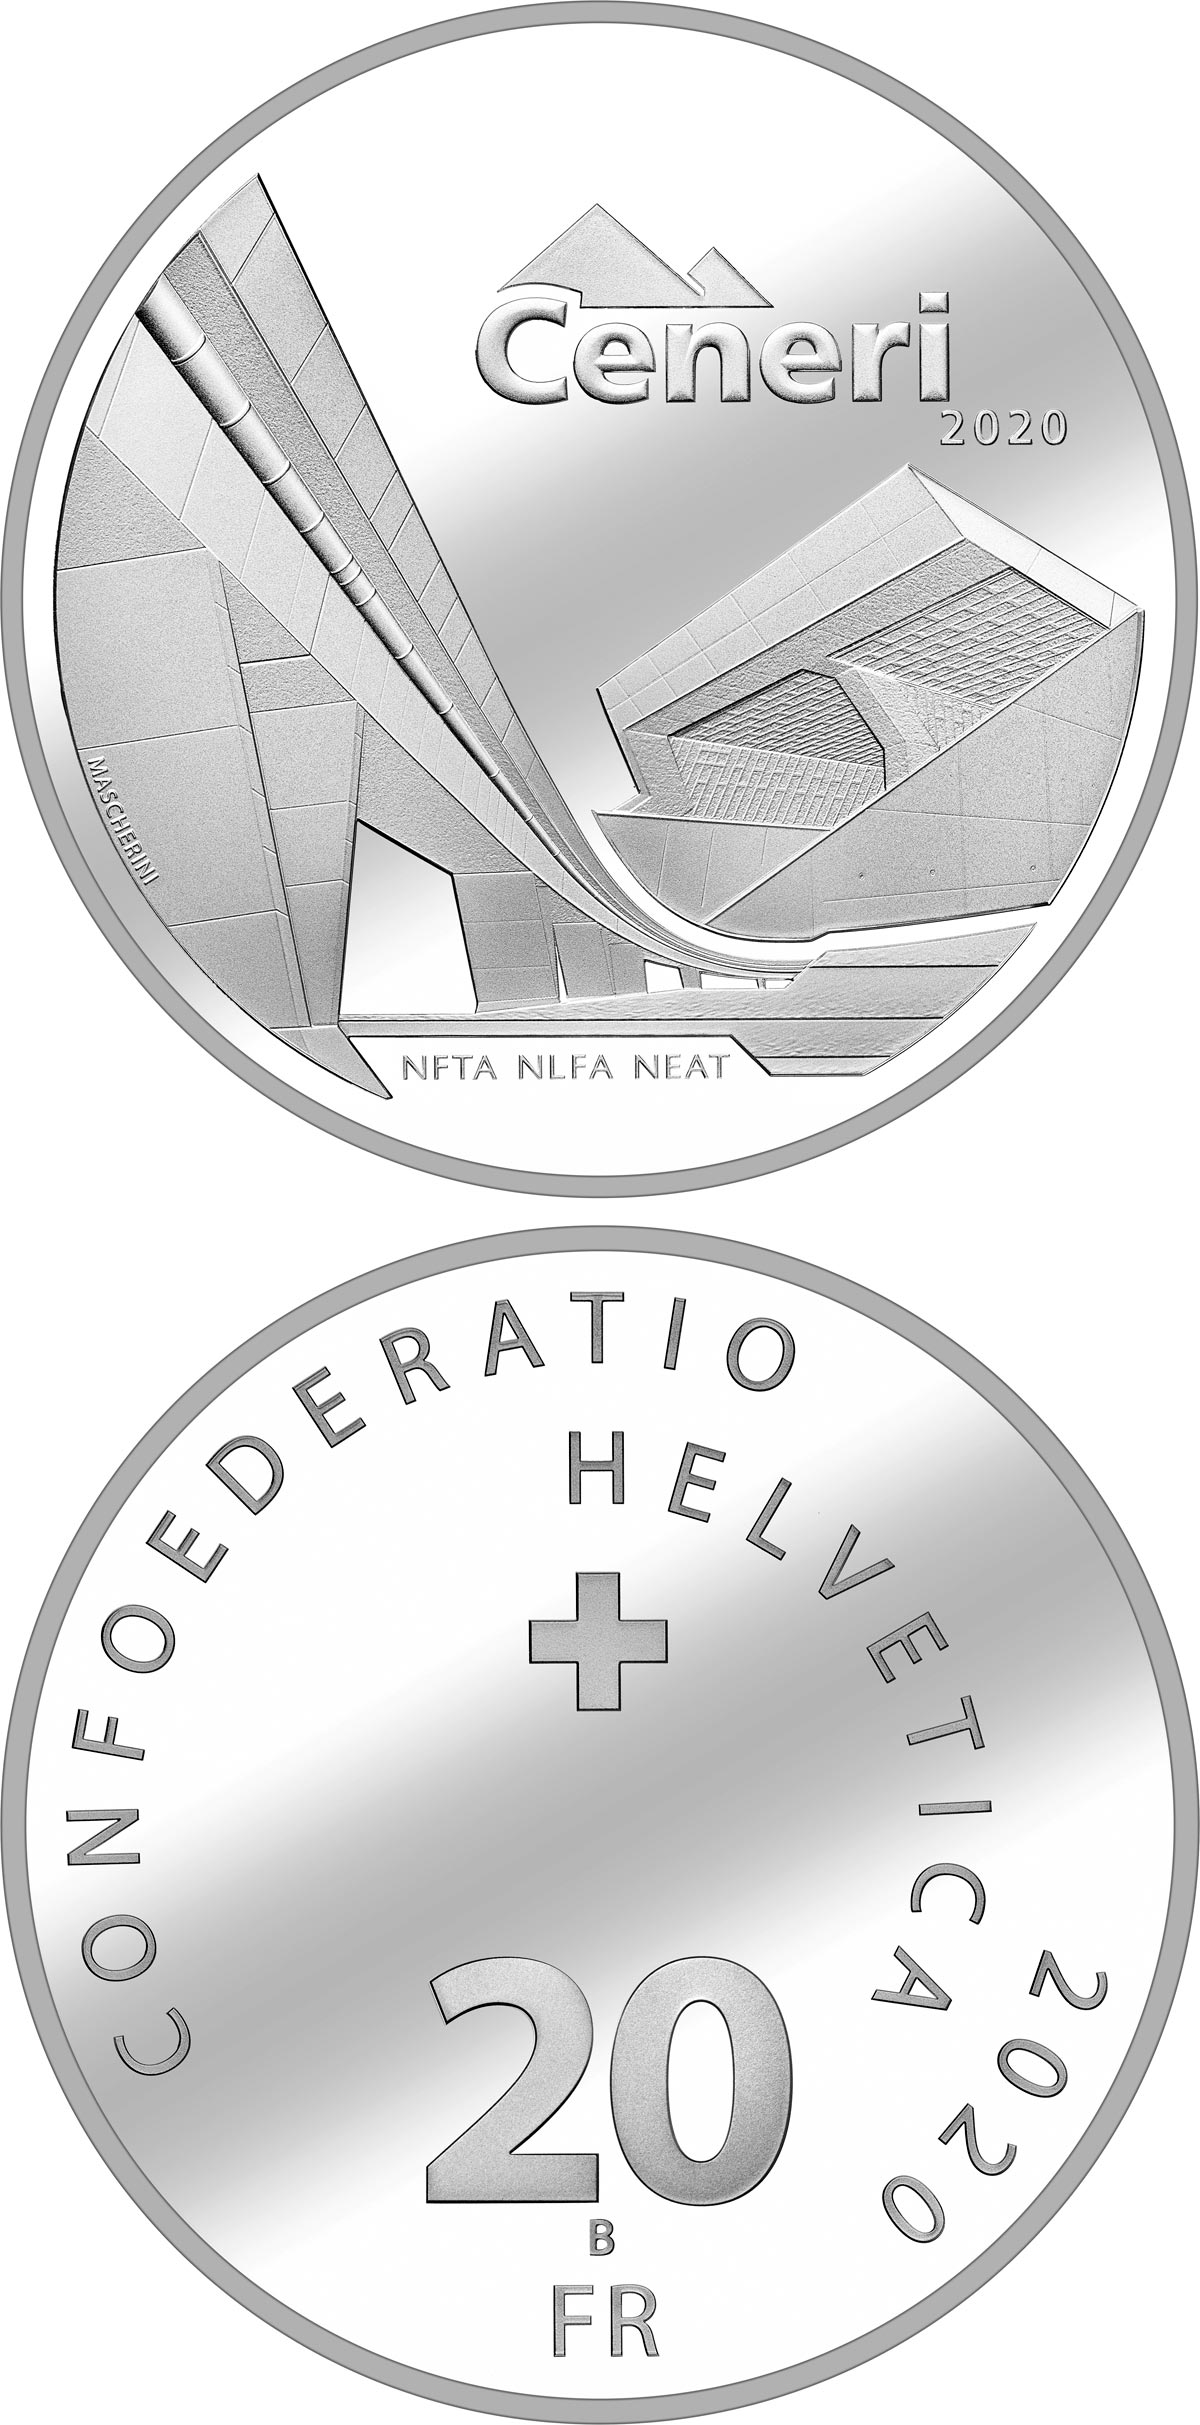 Image of 20 francs coin - NRLA – Ceneri 2020 | Switzerland 2020.  The Silver coin is of Proof quality.